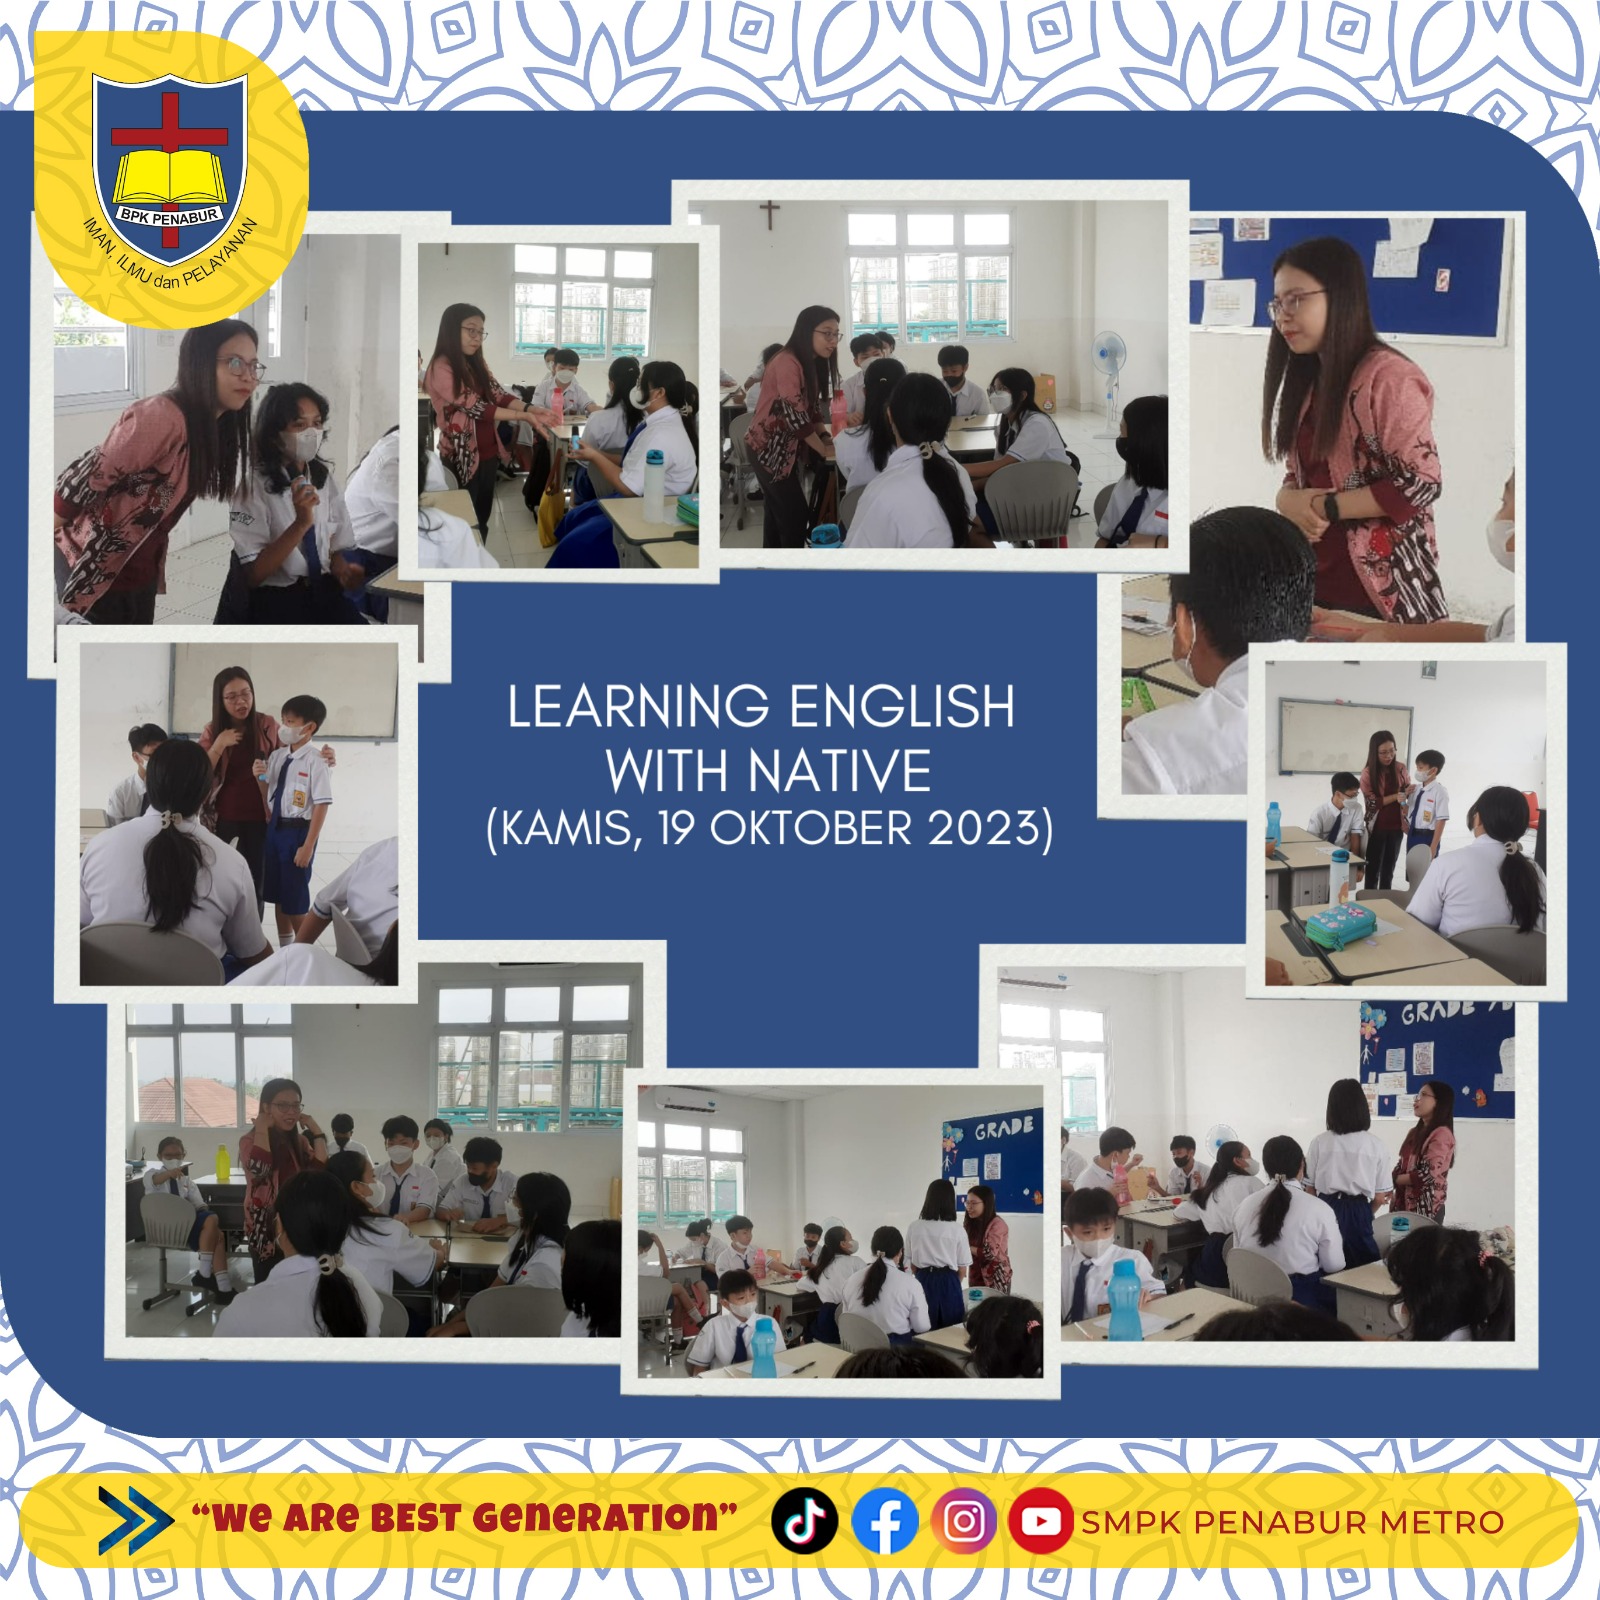 LEARNING ENGLISH WITH NATIVE (KAMIS, 19 OKTOBER 2023)